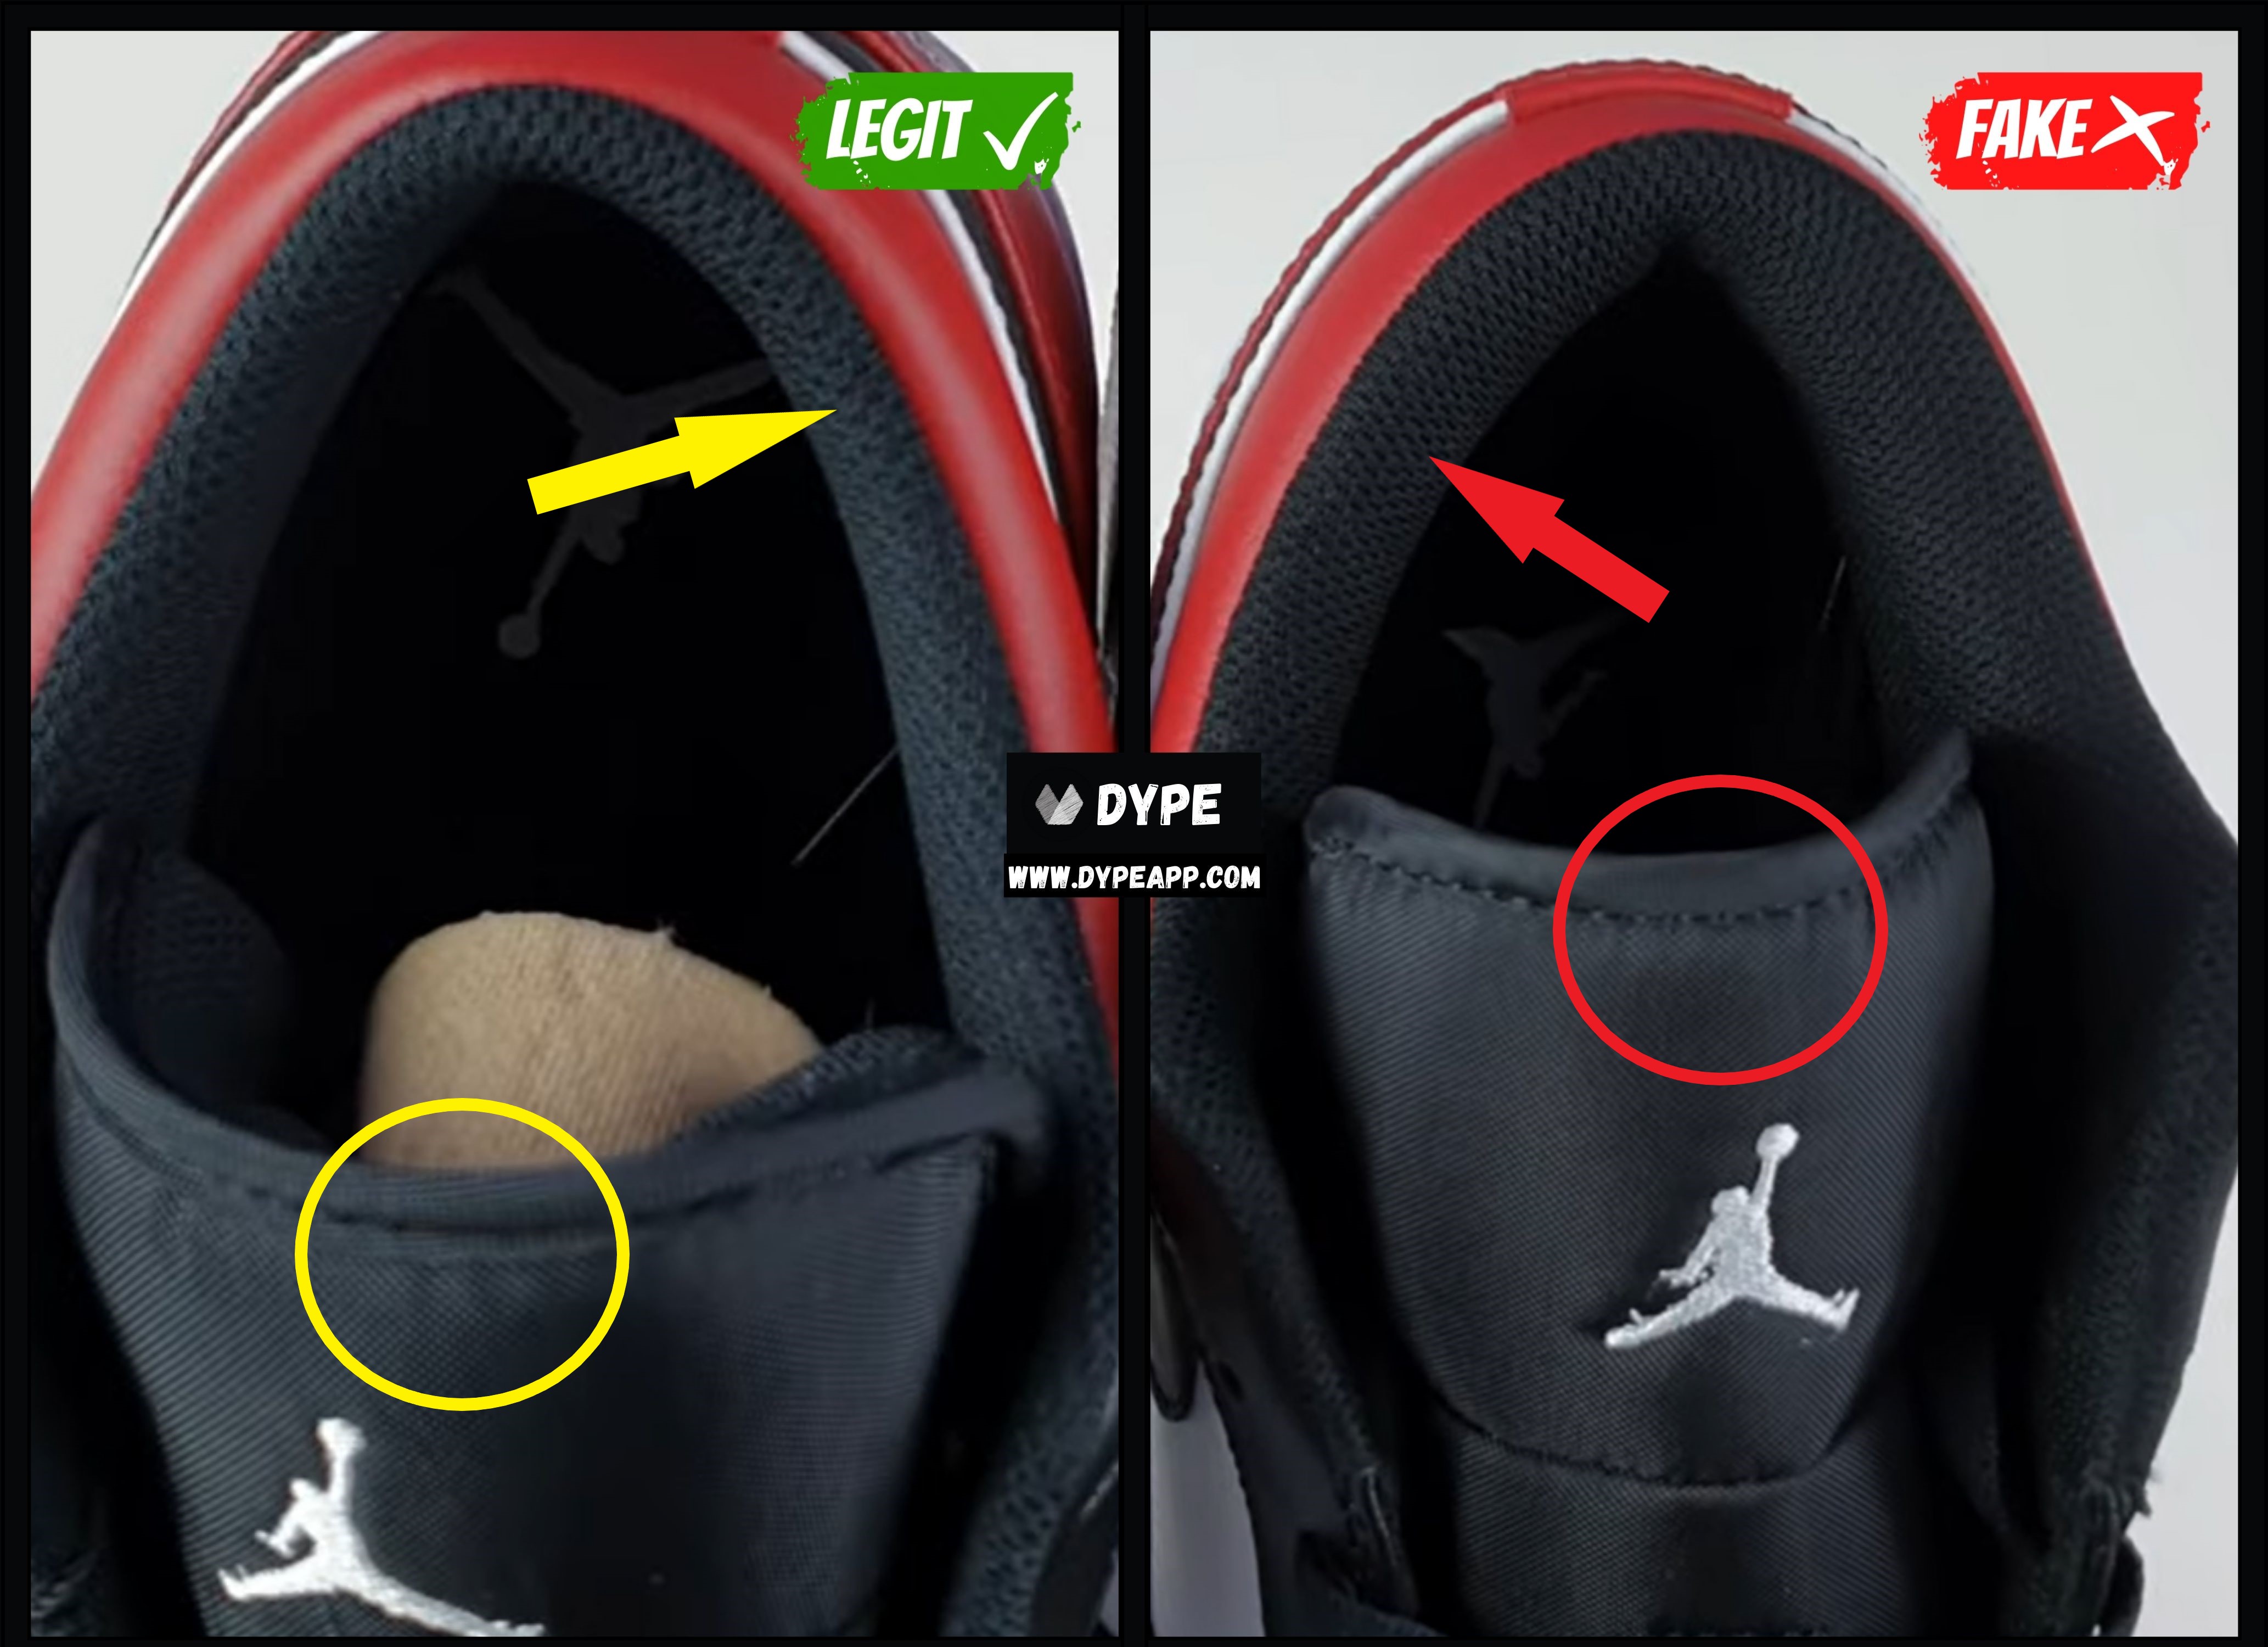 how to know if jordan 1 low is original